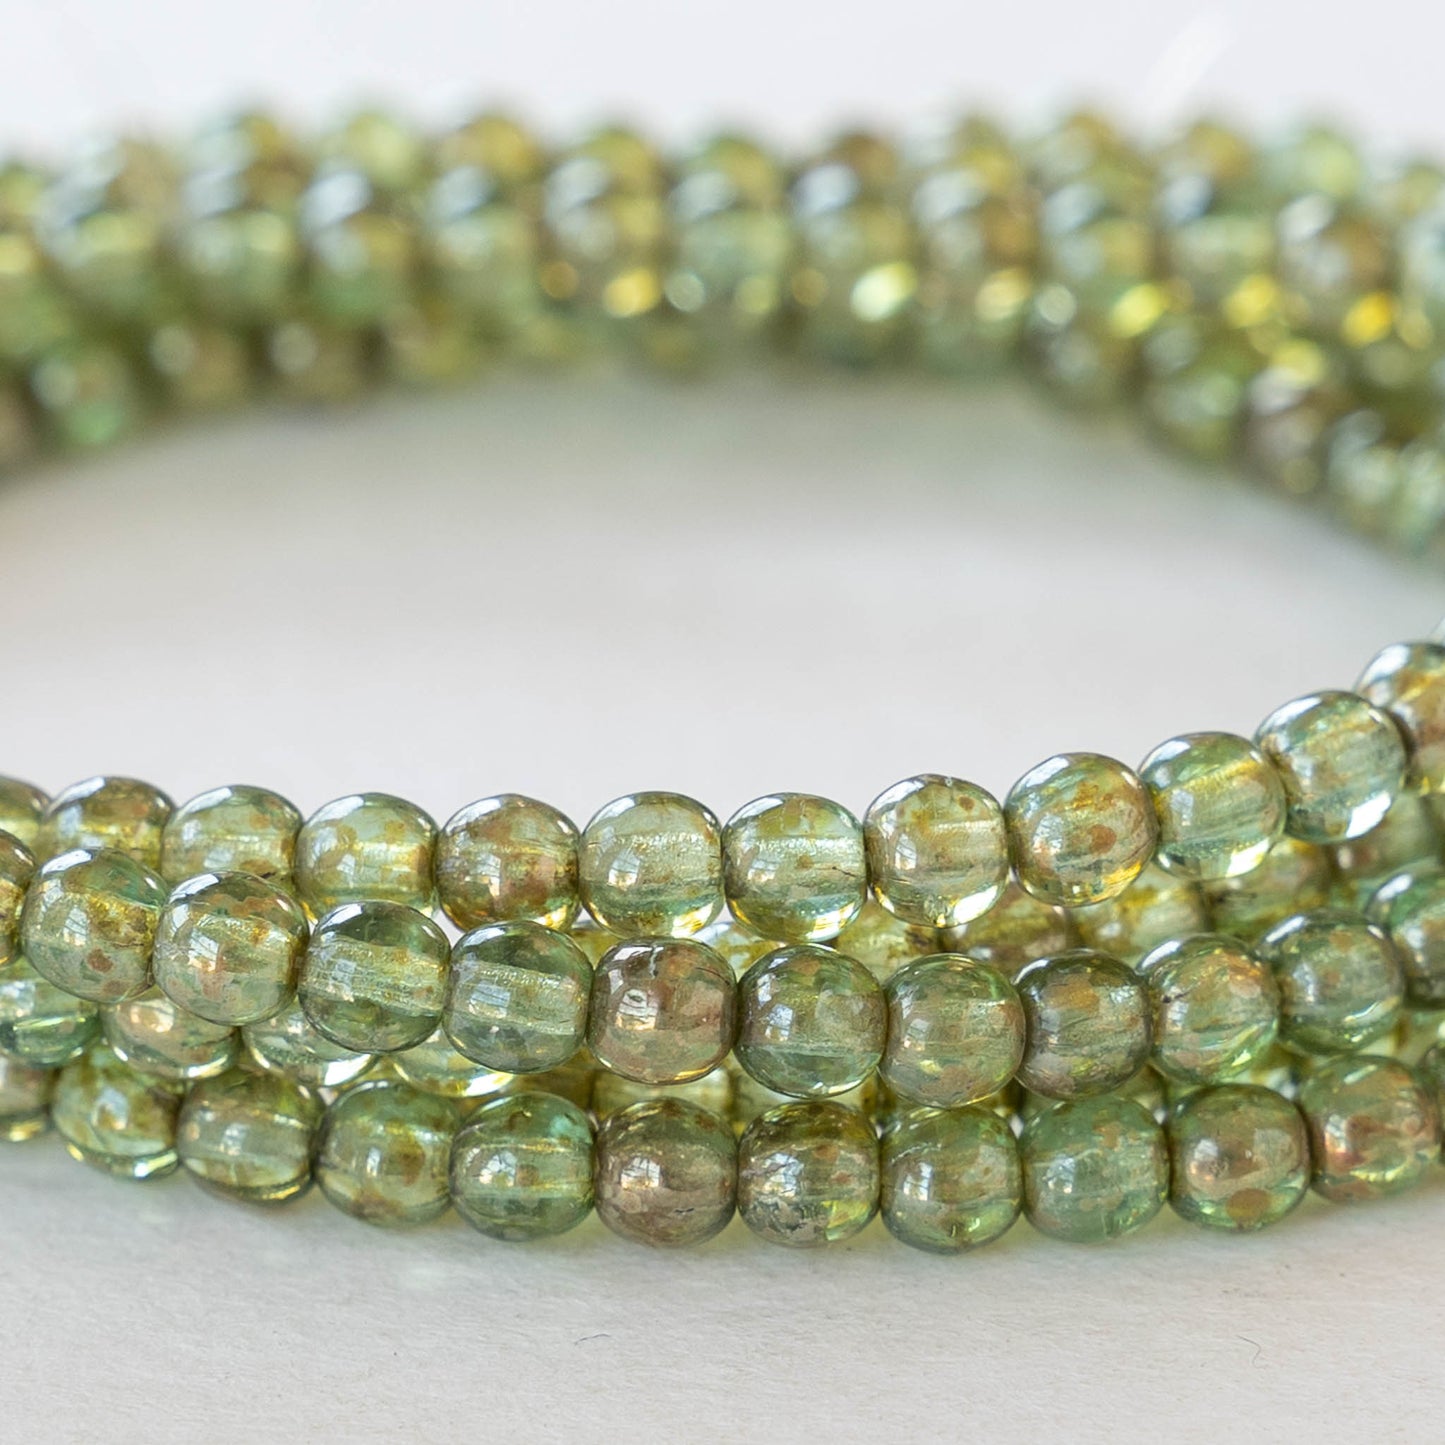 200pcs 4mm Green Color Round Glass beads For Jewelry Making DIY